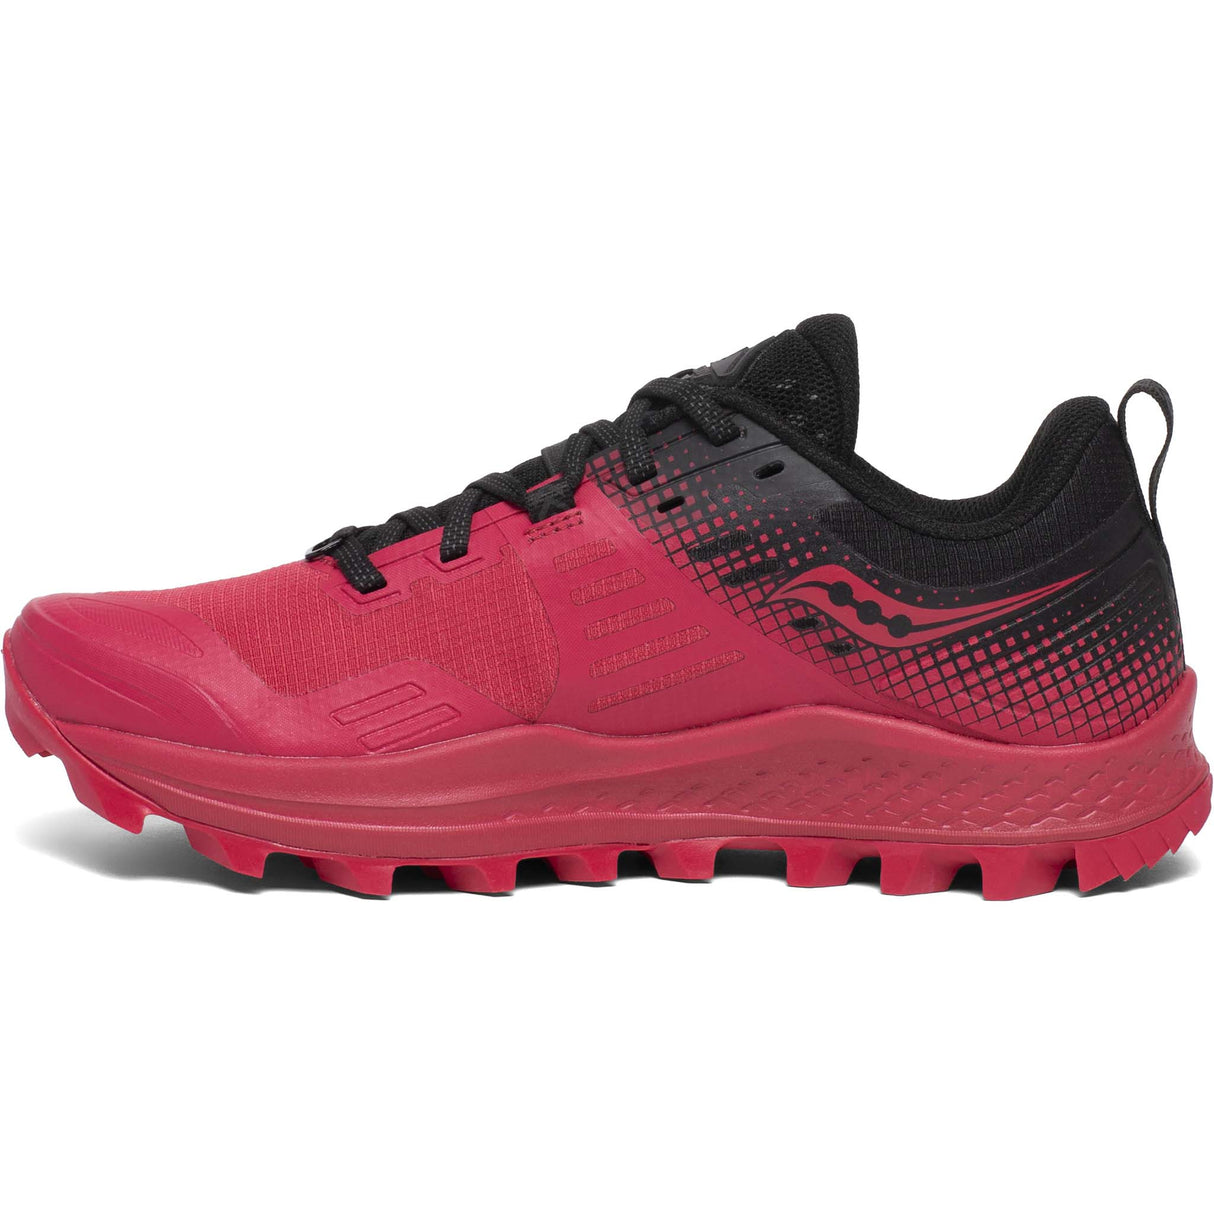 Saucony Peregrine 10 ST barberry black femme lateral